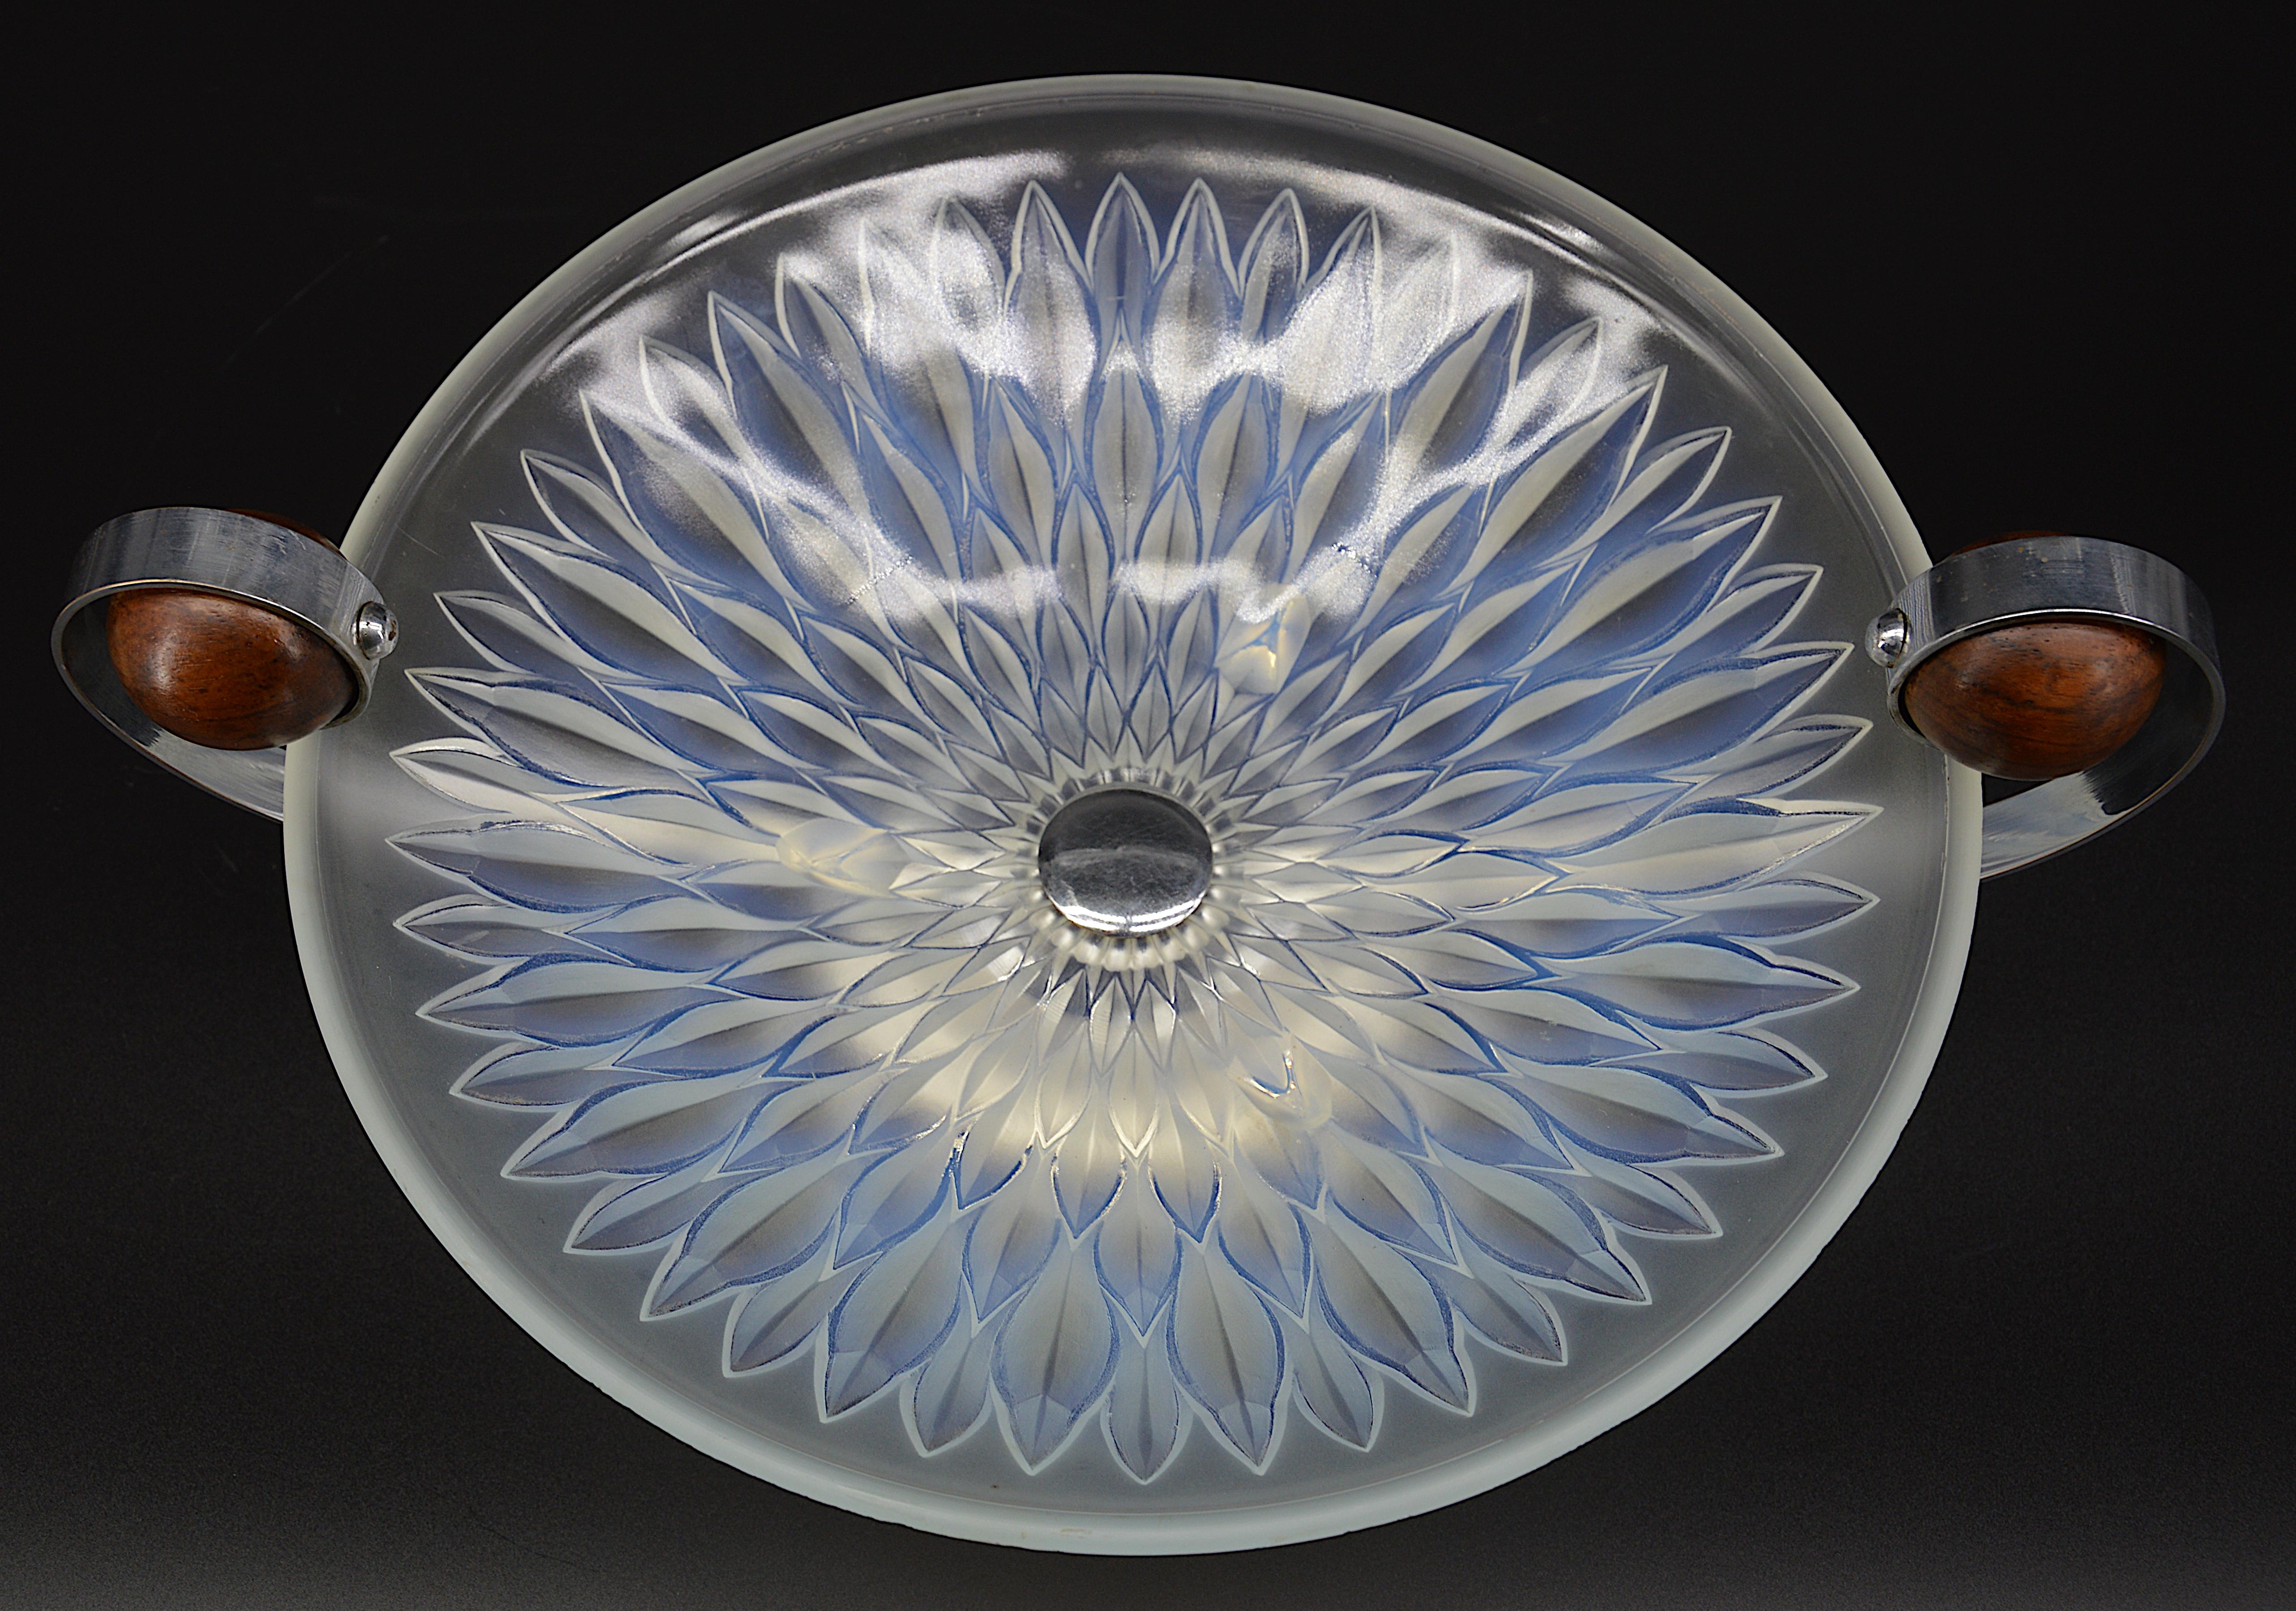 French Art deco center bowl by CHOISY-LE-ROI (Paris), France, 1930s. Opalescent molded glass. Wood and chromed handles. Chromed metal base. Overall width: 15